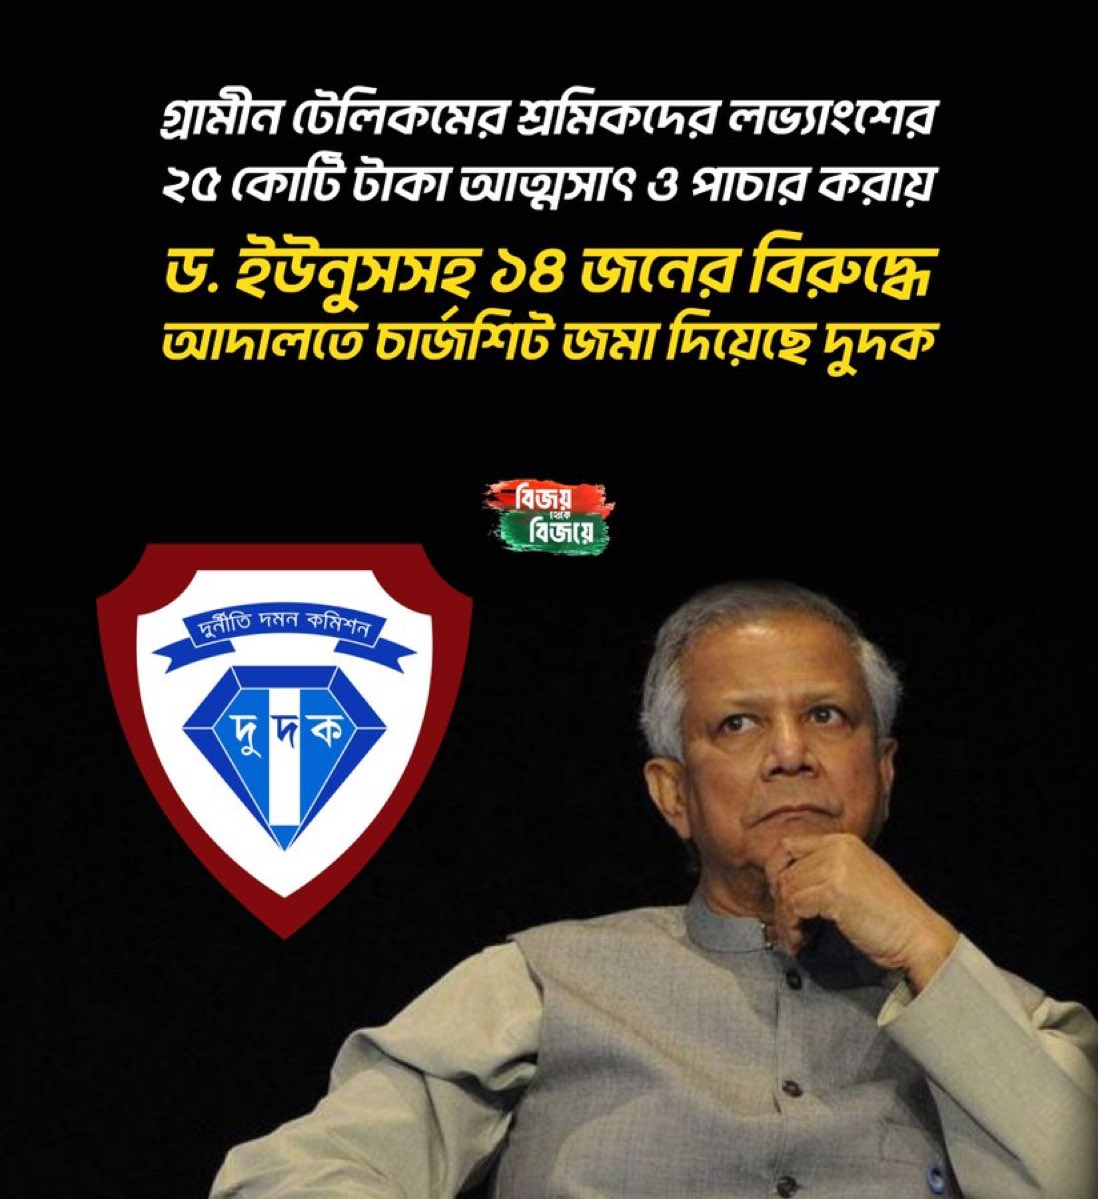 #DrYunus and 14 others face charges for #embezzlement of 25 crore taka in #Grameen Telecom. #AntiCorruption Commission files chargesheet for misappropriation and #tax evasion. ⚖️📞 #GrameenTelecom #CorruptionCharges